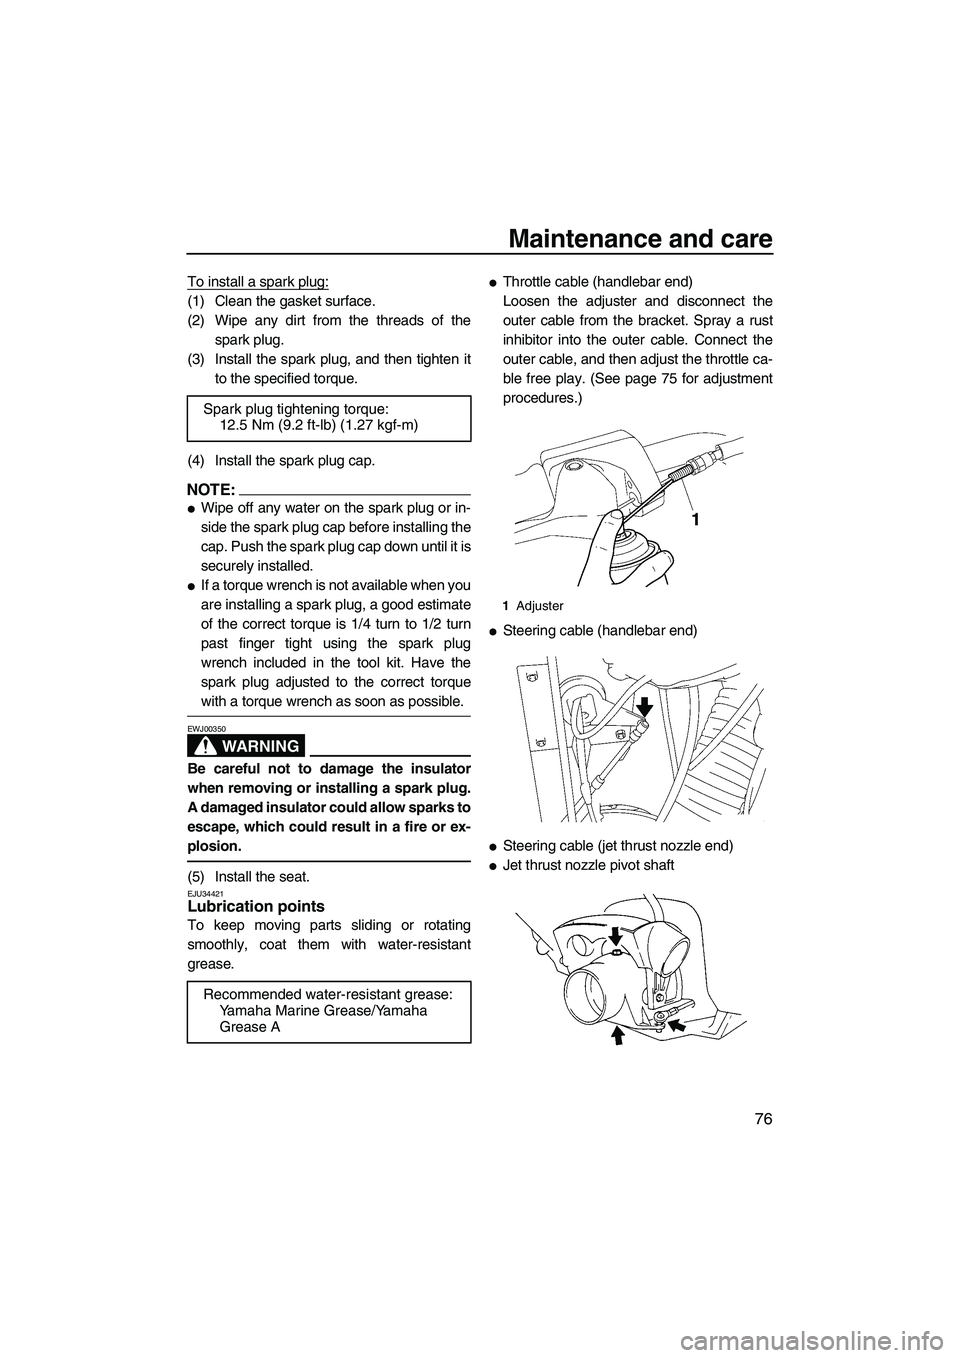 YAMAHA VX SPORT 2007  Owners Manual Maintenance and care
76
To install a spark plug:
(1) Clean the gasket surface.
(2) Wipe any dirt from the threads of the
spark plug.
(3) Install the spark plug, and then tighten it
to the specified to